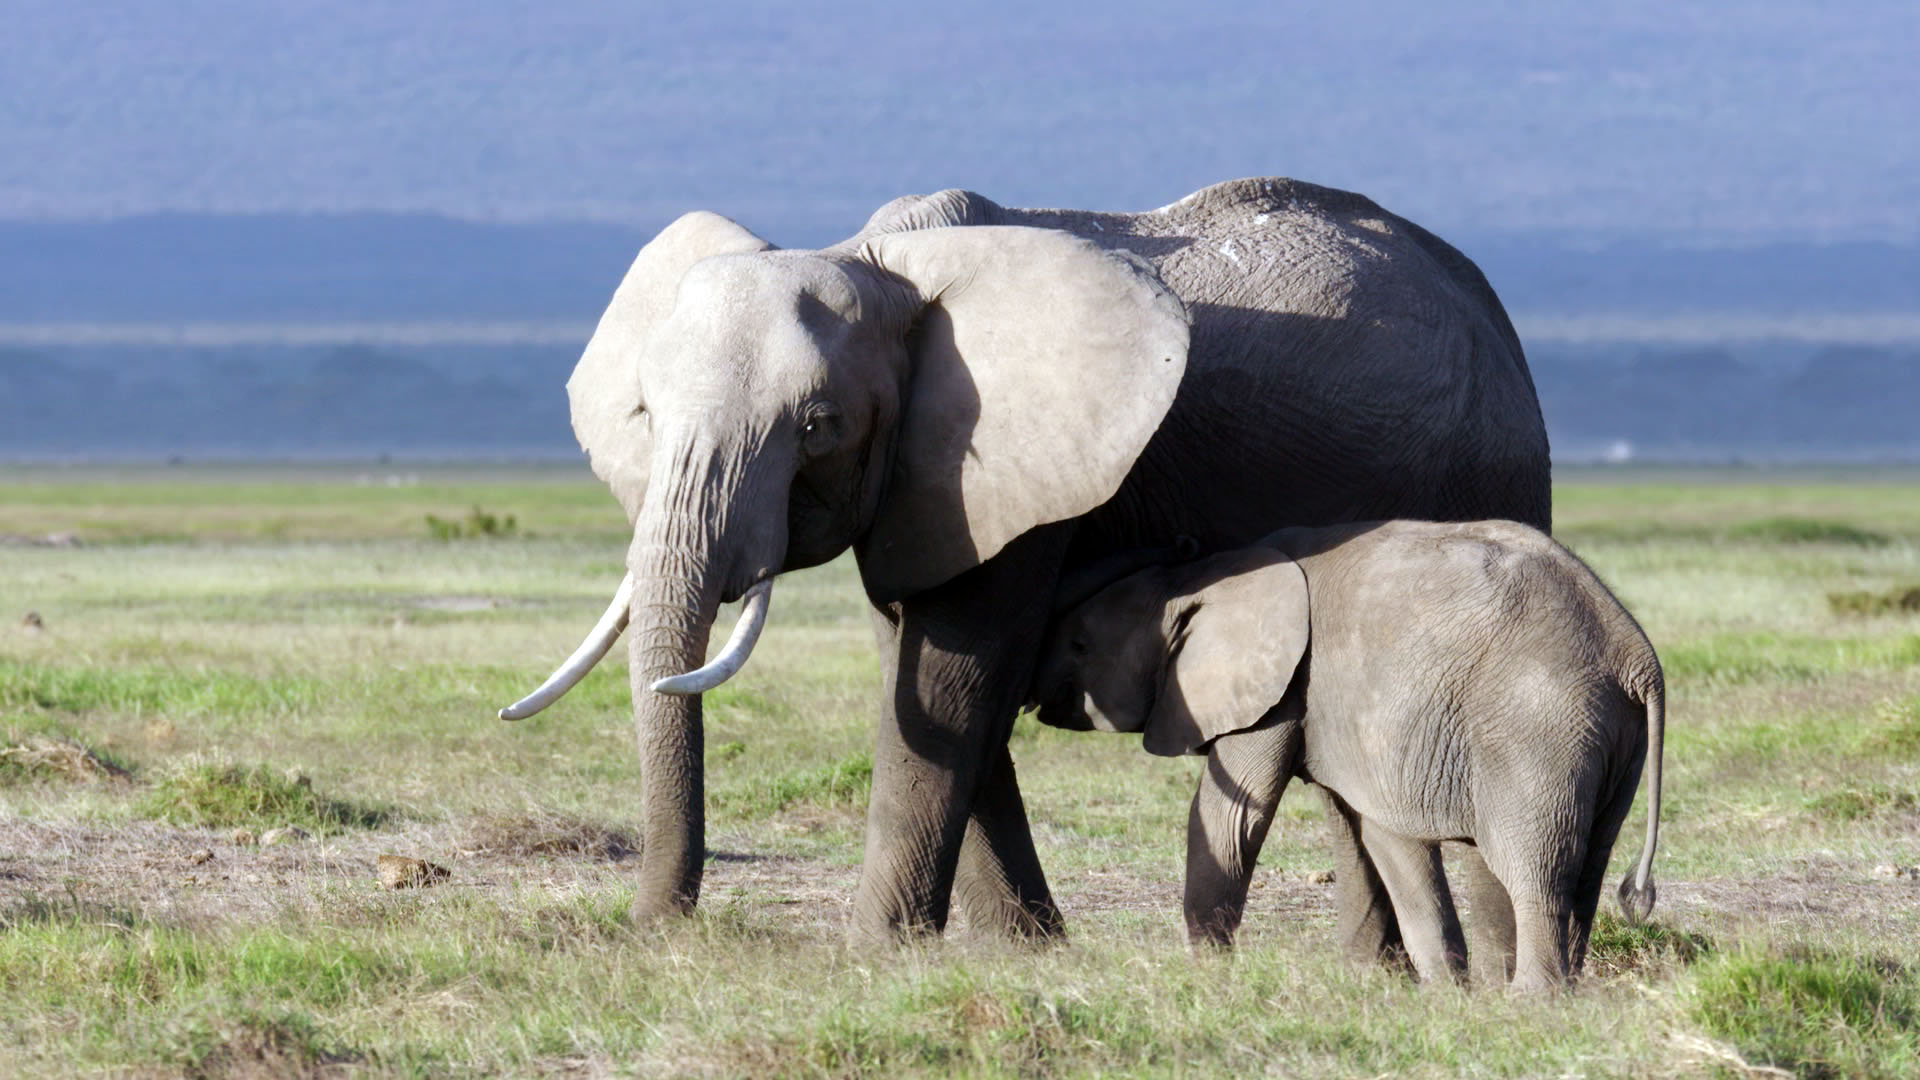 New Research Shows That Elephants And Other Animals Can Suffer From PTSD